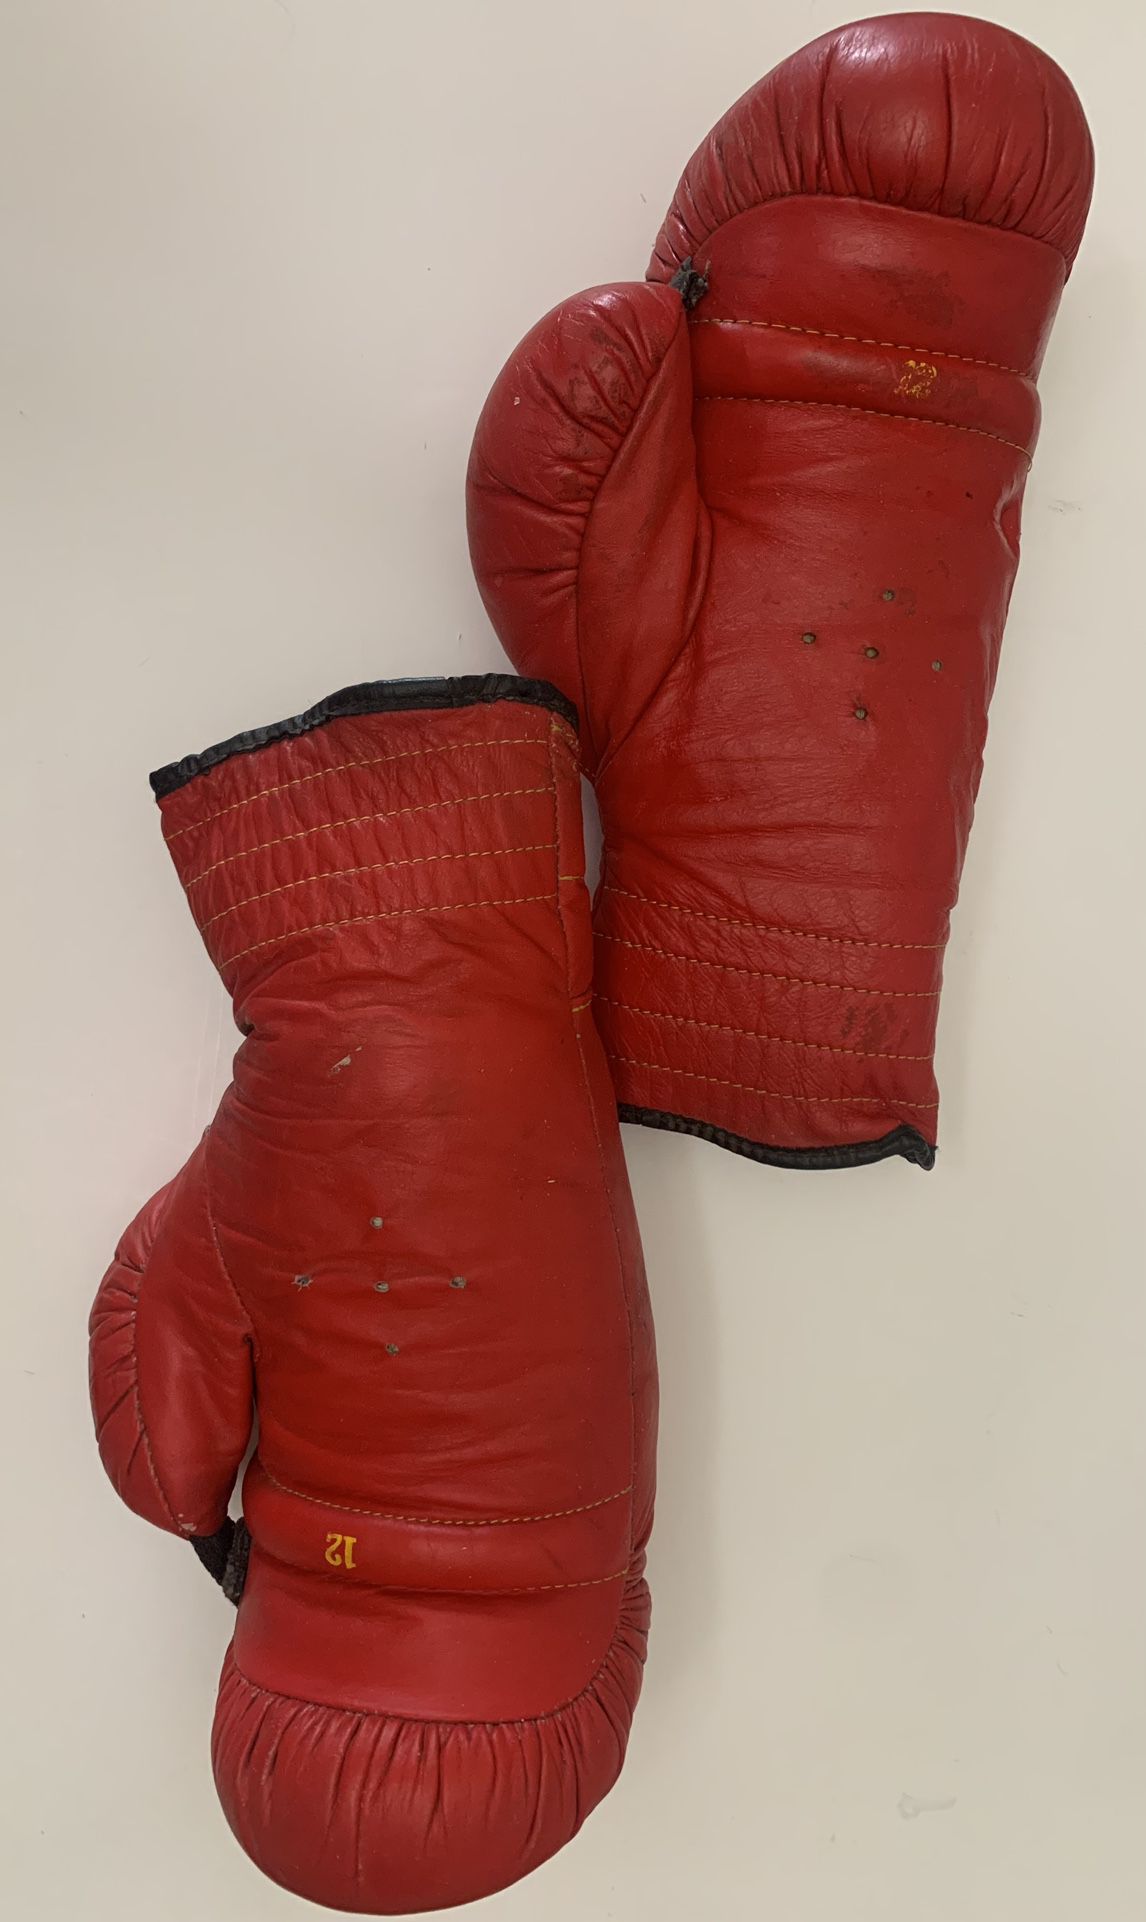 Boxing Glove - 107 For Sale on 1stDibs